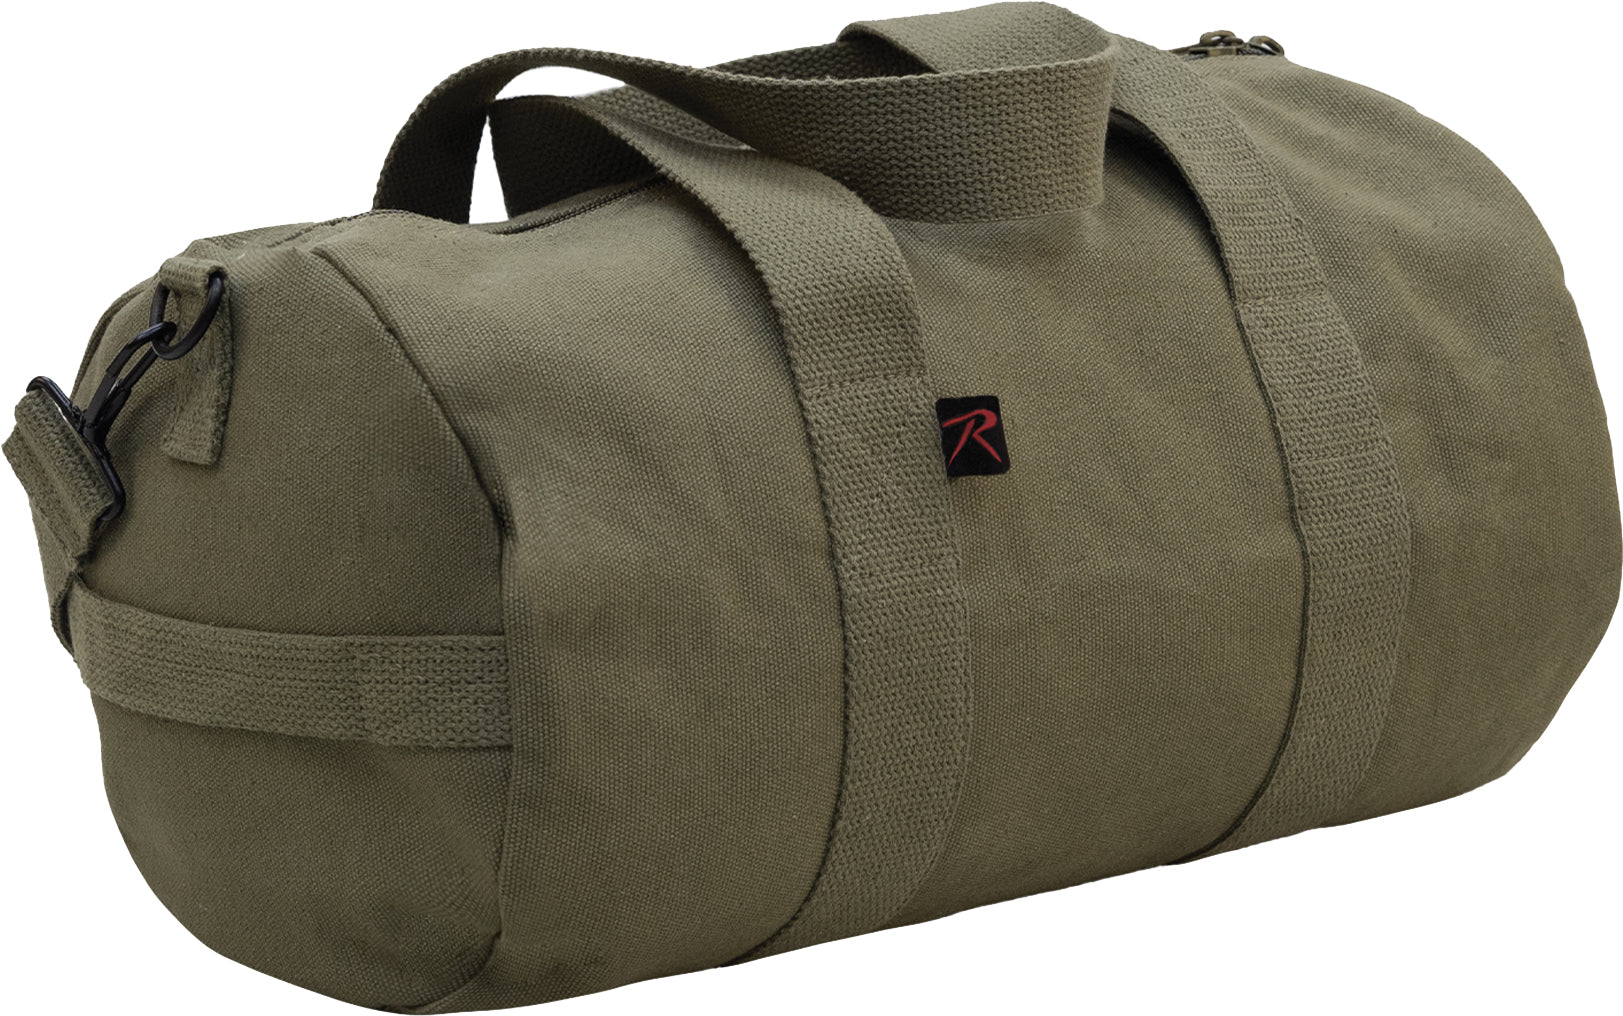 Olive Drab Heavyweight Cotton Canvas Duffle Bag Sports Gym Shoulder & Carry Bag 15